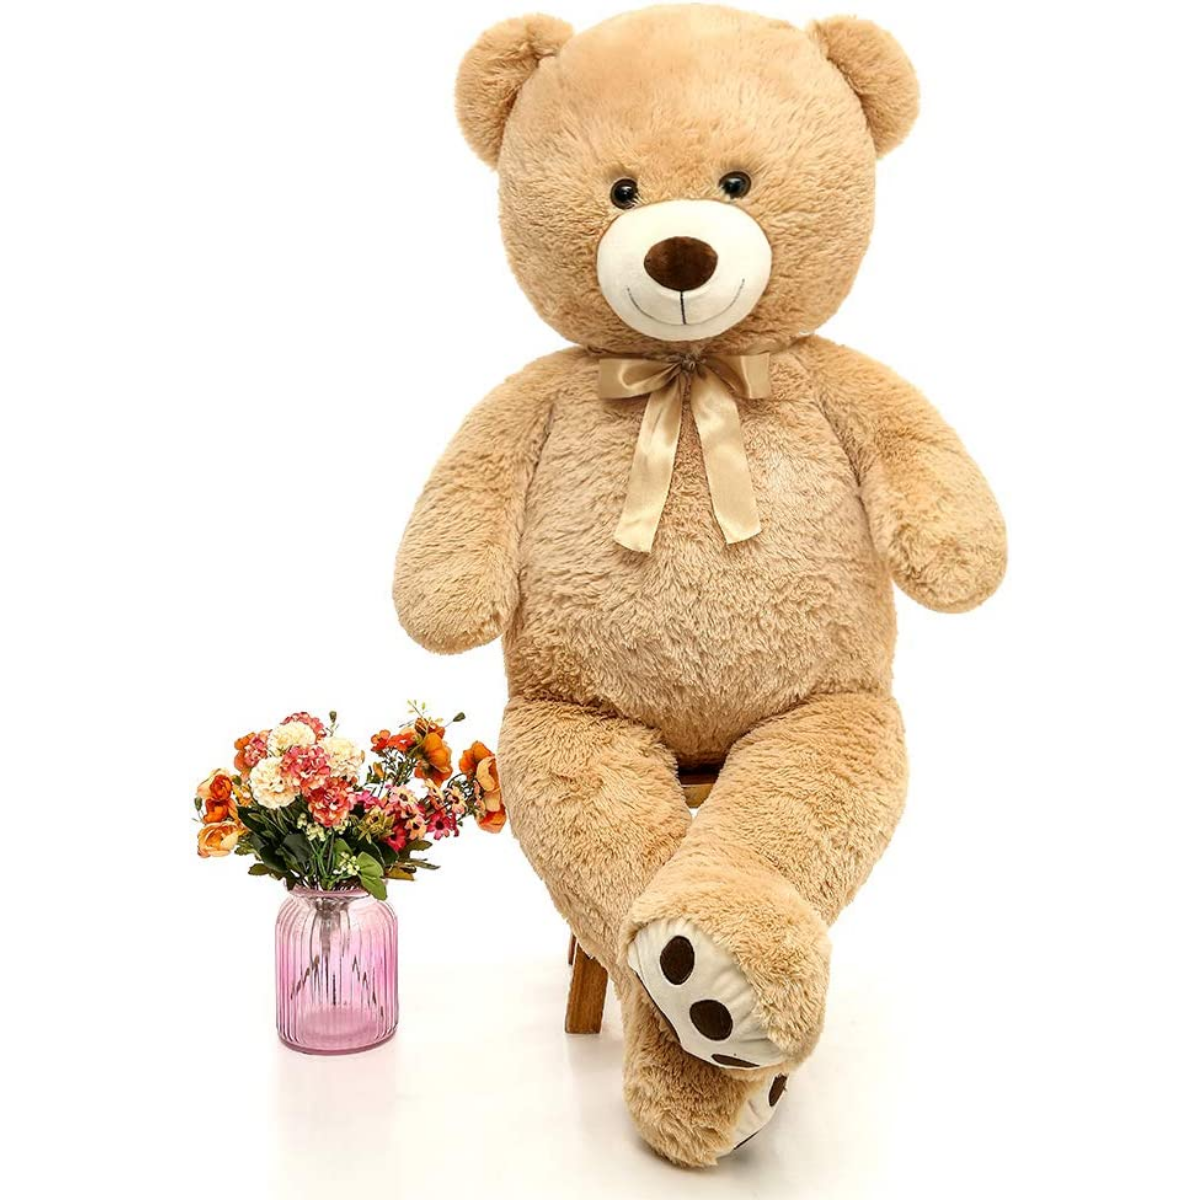 Adding a teddy bear can instantly up the cuteness factor and cozy feel in any room. Just look at this huge brown-colored teddy bear! It fits in easily with any decorative theme. Our teddy bear is packed with a soft and snuggly plushy material and filled with PP cotton. It's incredibly soft and perfect for cuddling with! Ideal present for your loved ones, be it family, friends, or the adorable little ones.